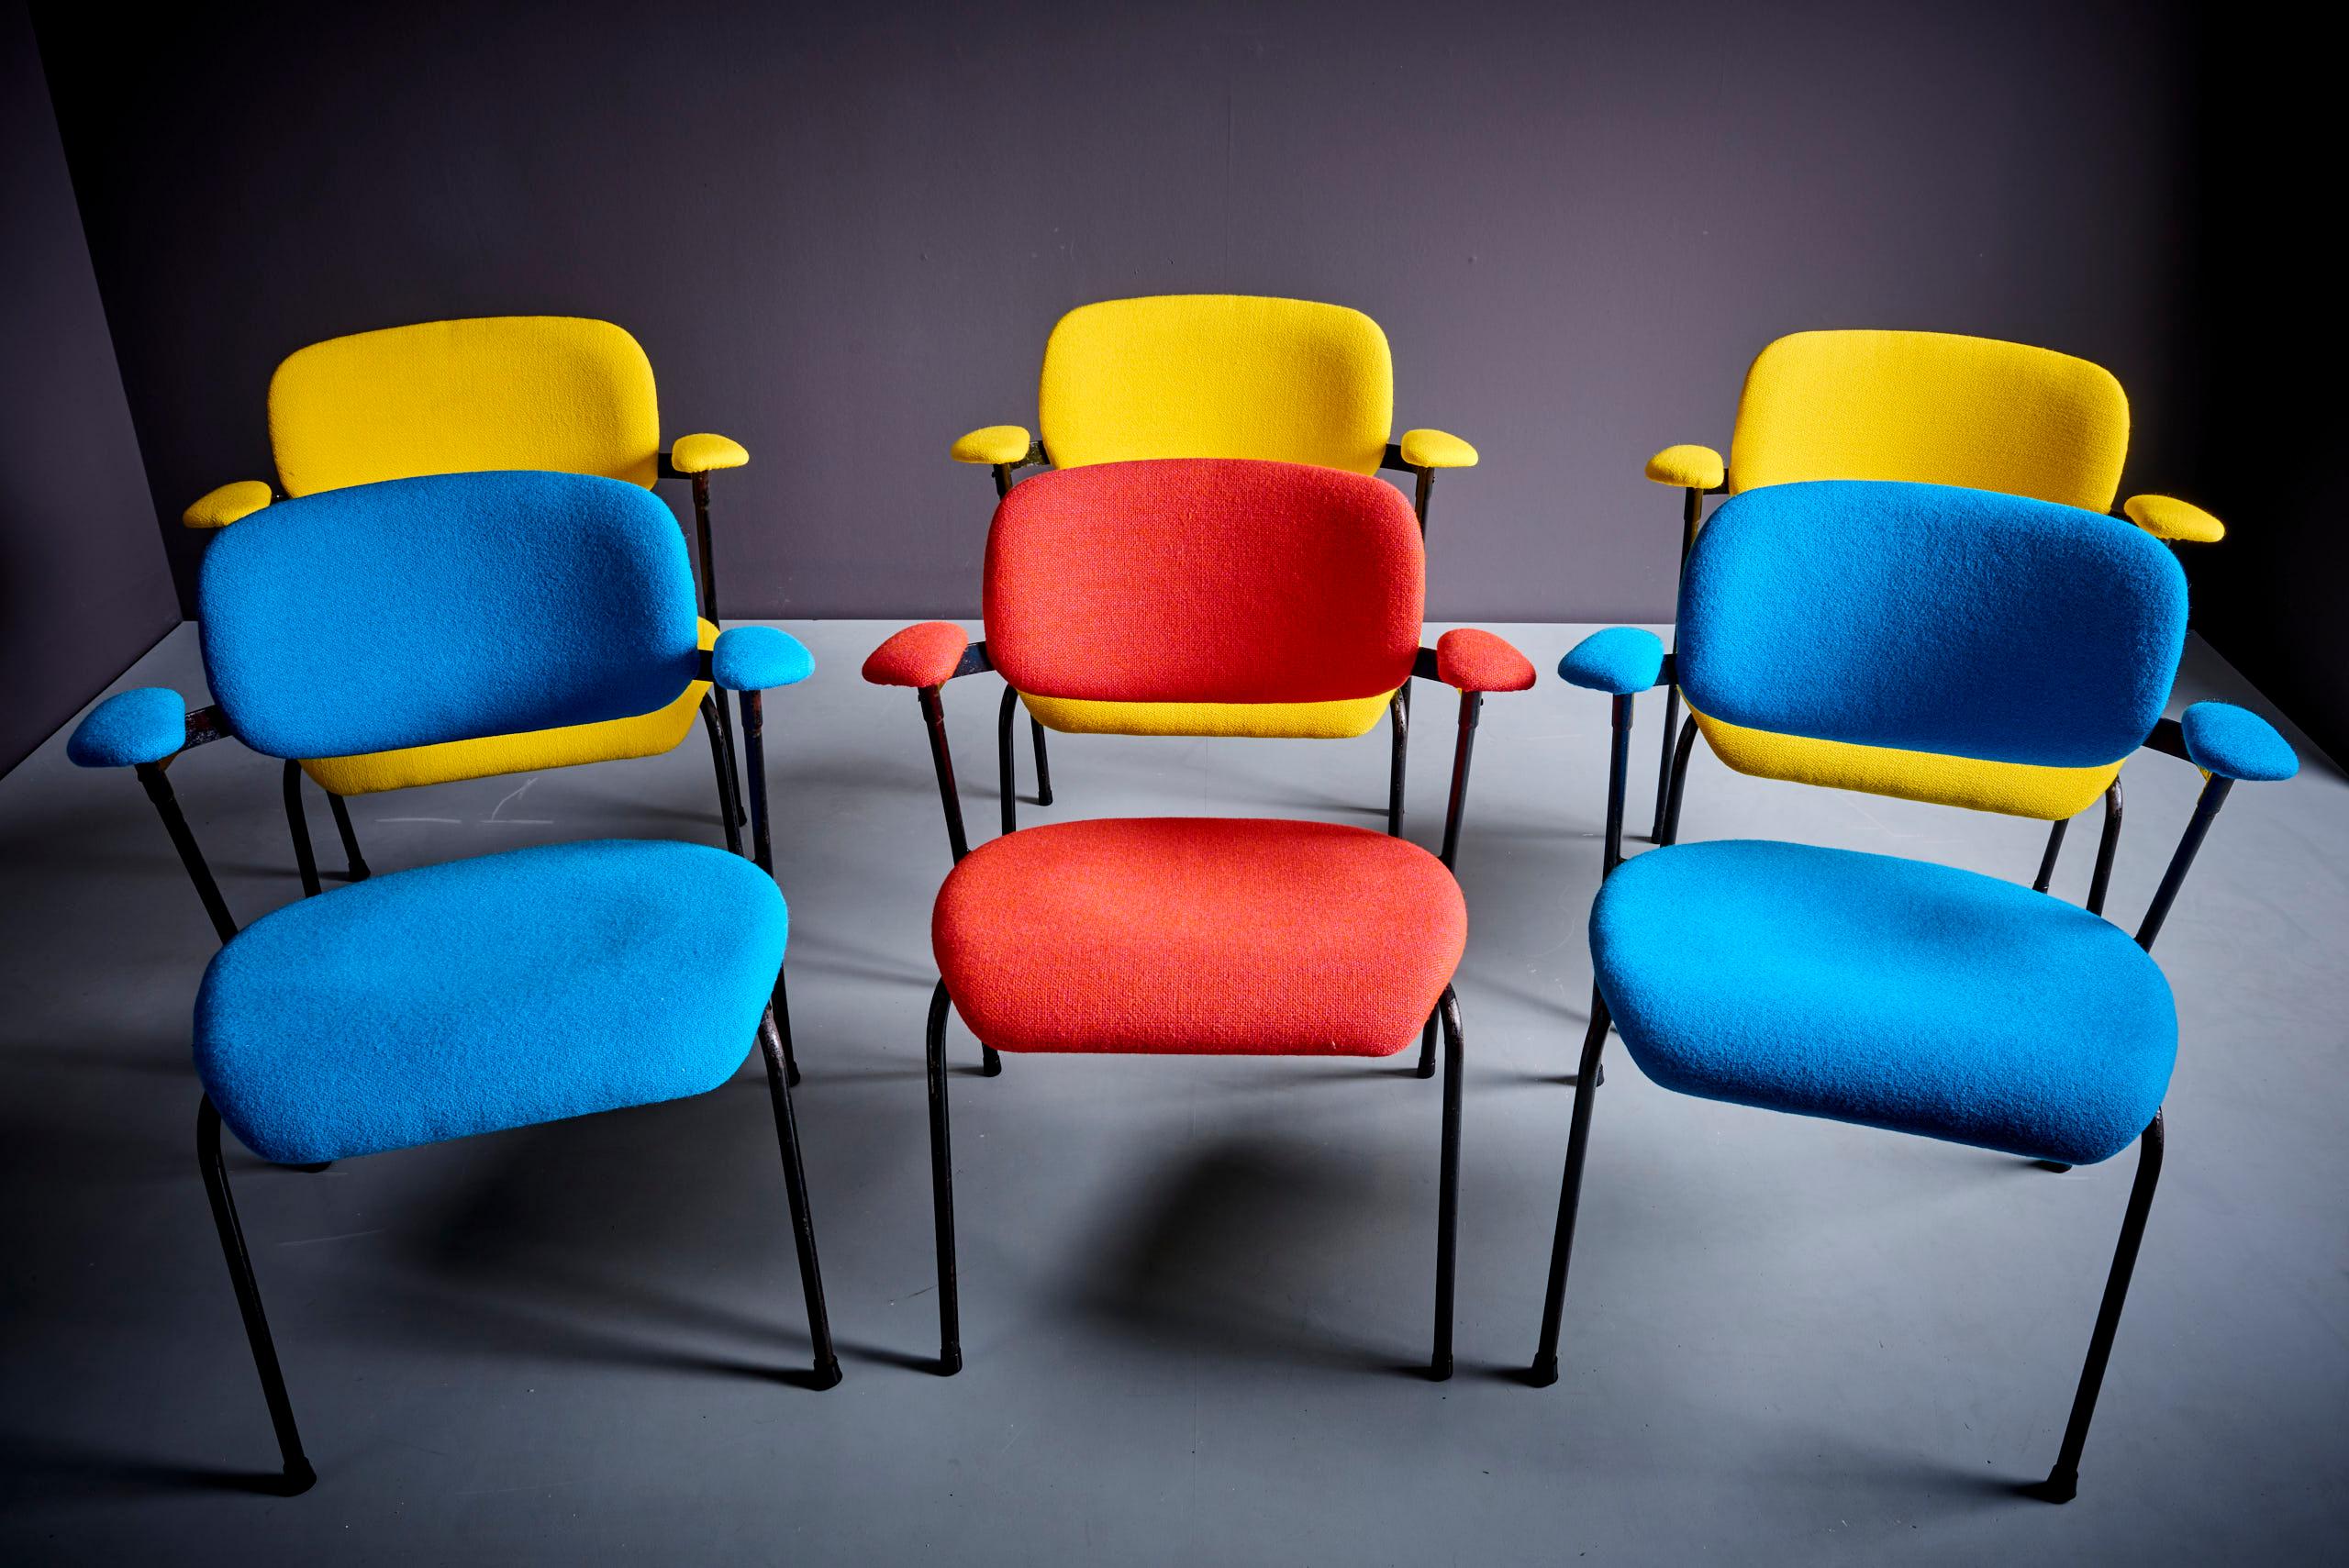 Willy van der Meeren for Tubax Set of 6 Lounge Chairs in blue, red, yellow 1950s For Sale 9